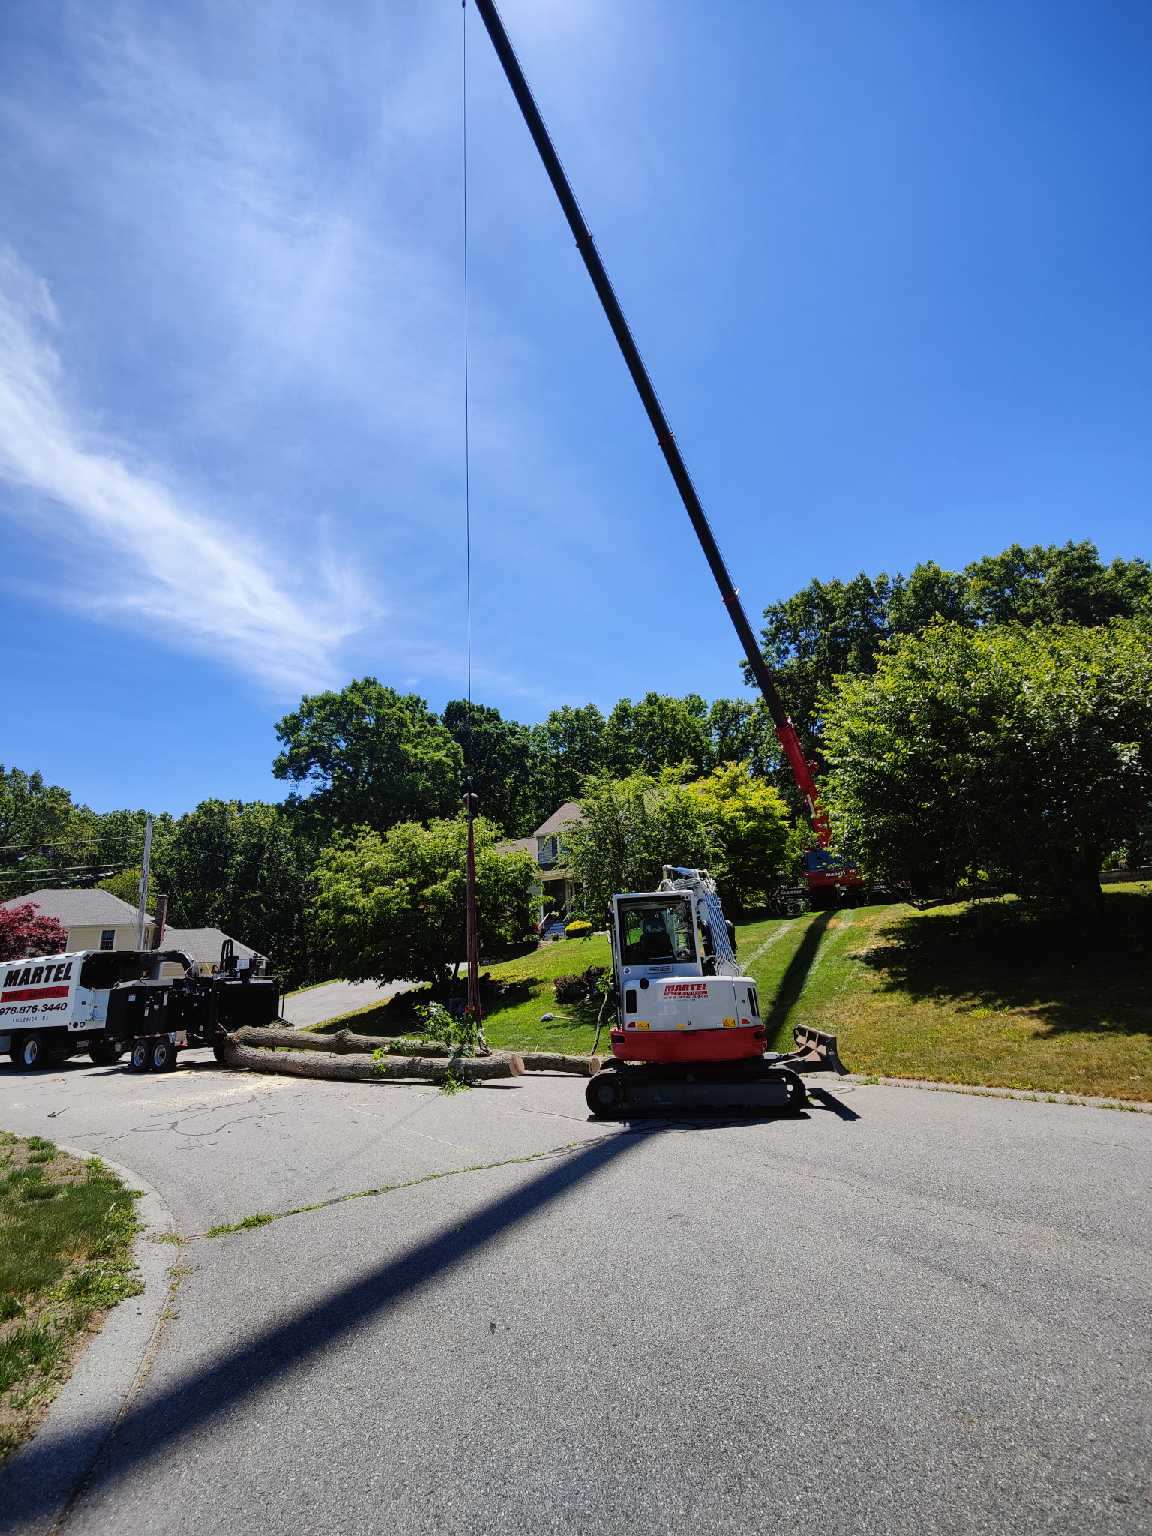 Tree Service and Removal in Tewksbury, MA.